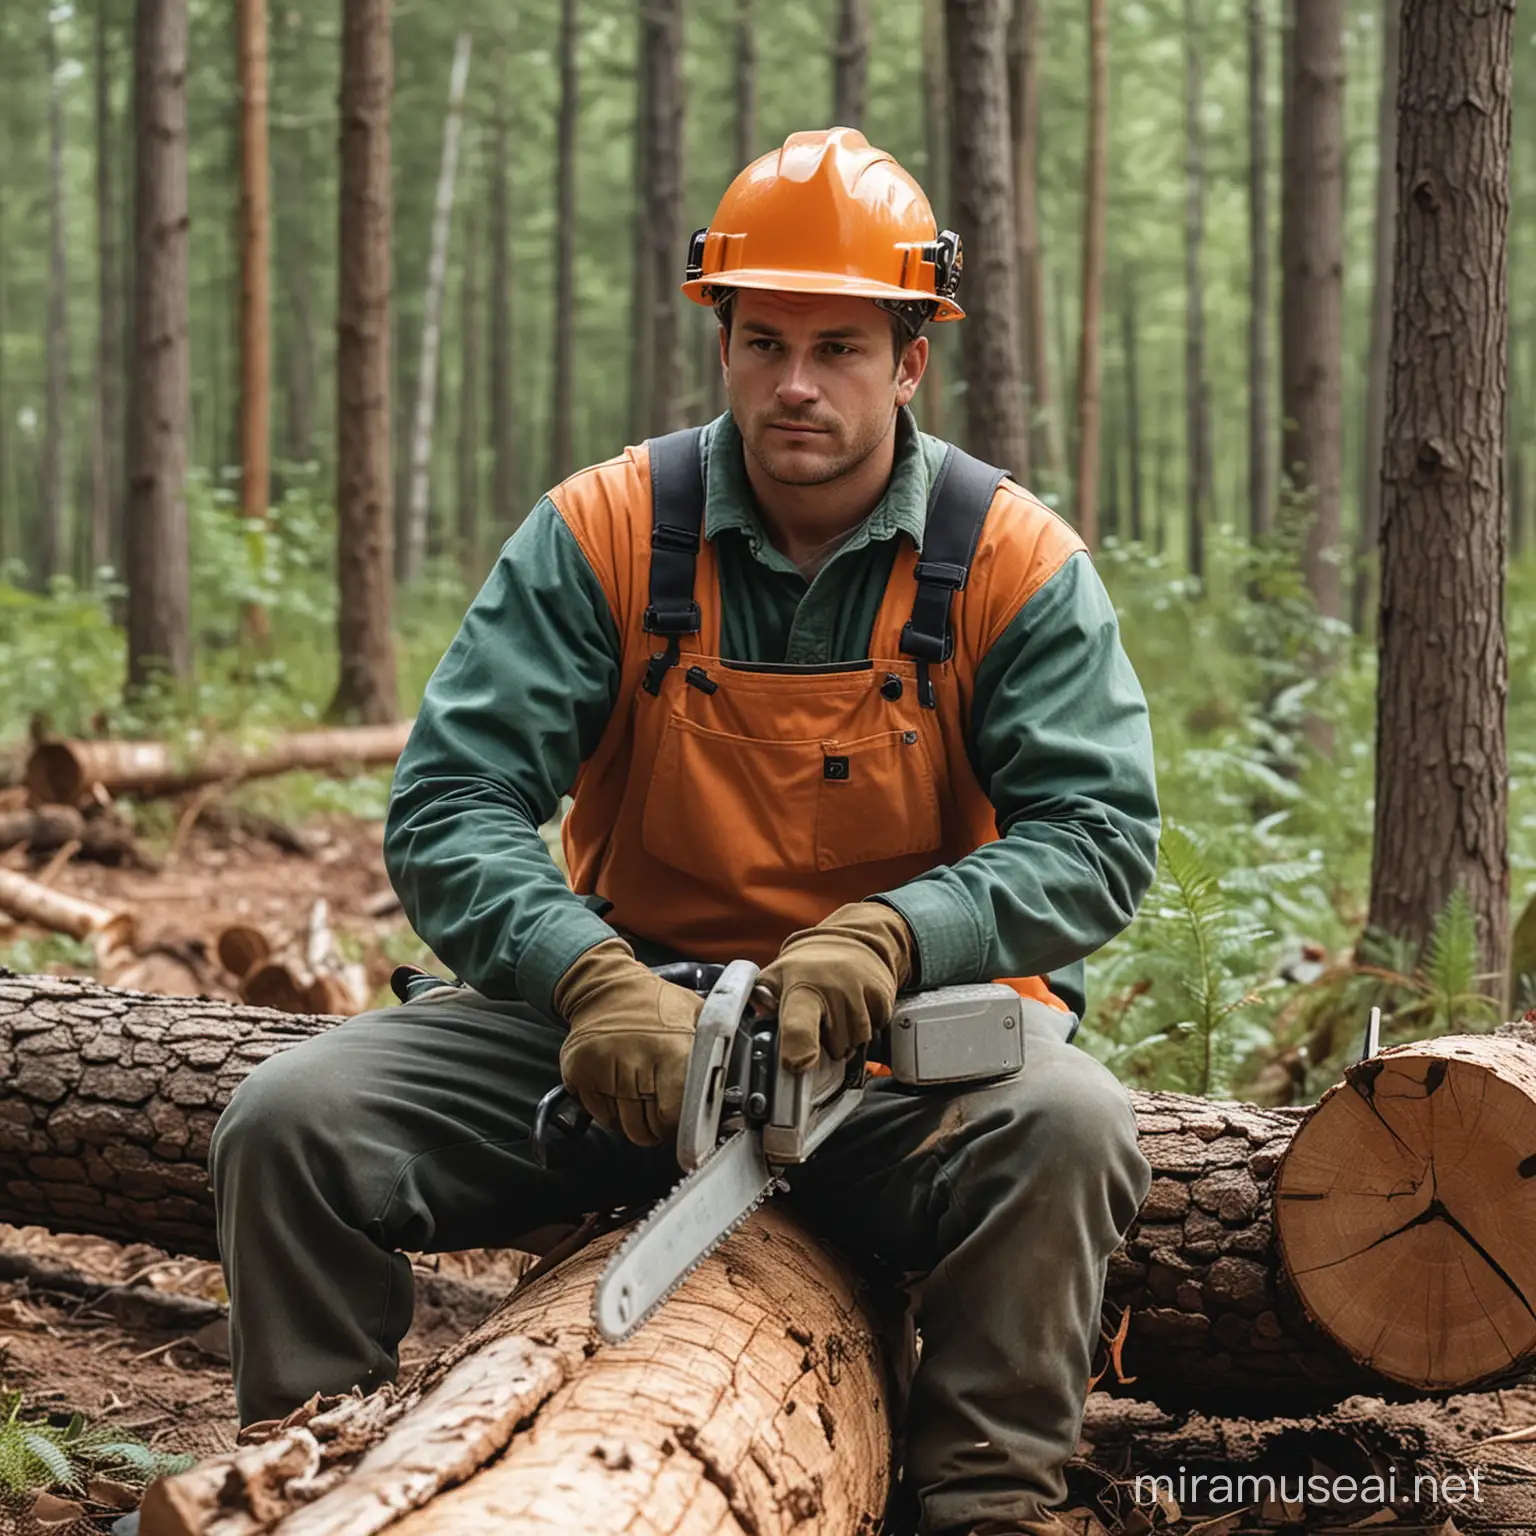 generate the photo of a forest worker sitting with the back straight, two hands below shoulder level and using a chainsaw to cut a log.
